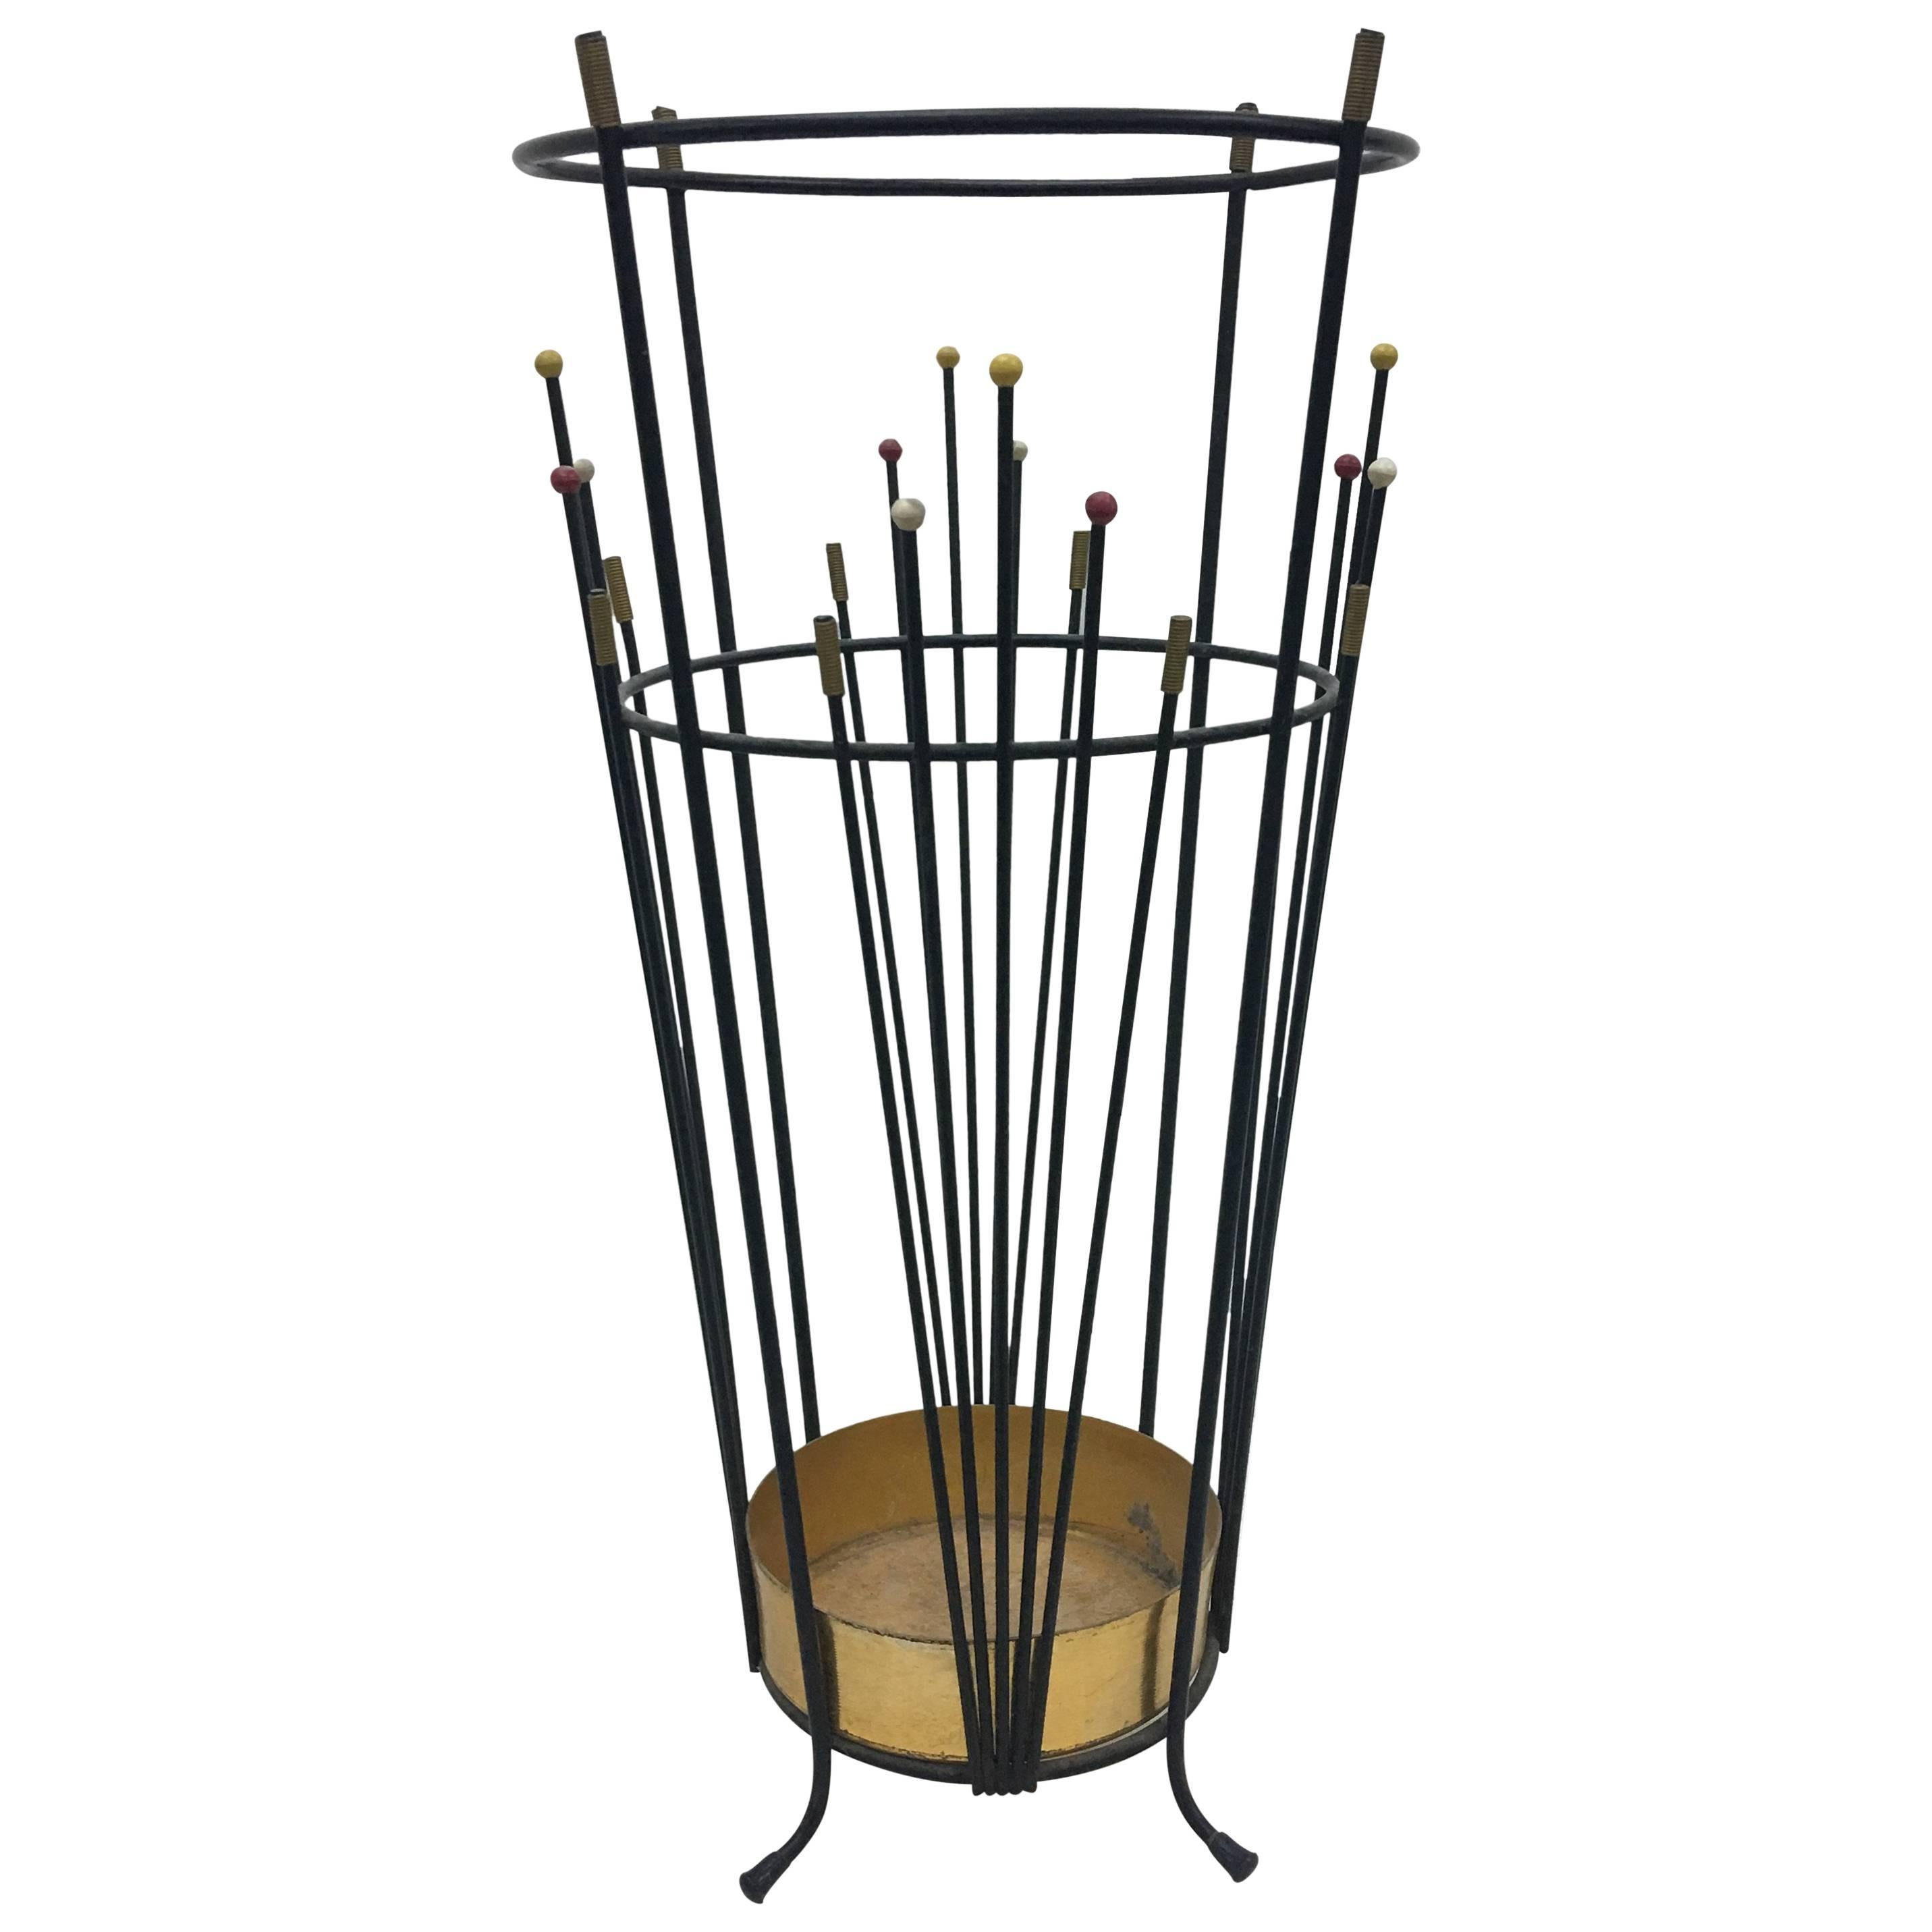 Mid-Century Modern Umbrella Stand, Made in Italy in 1950